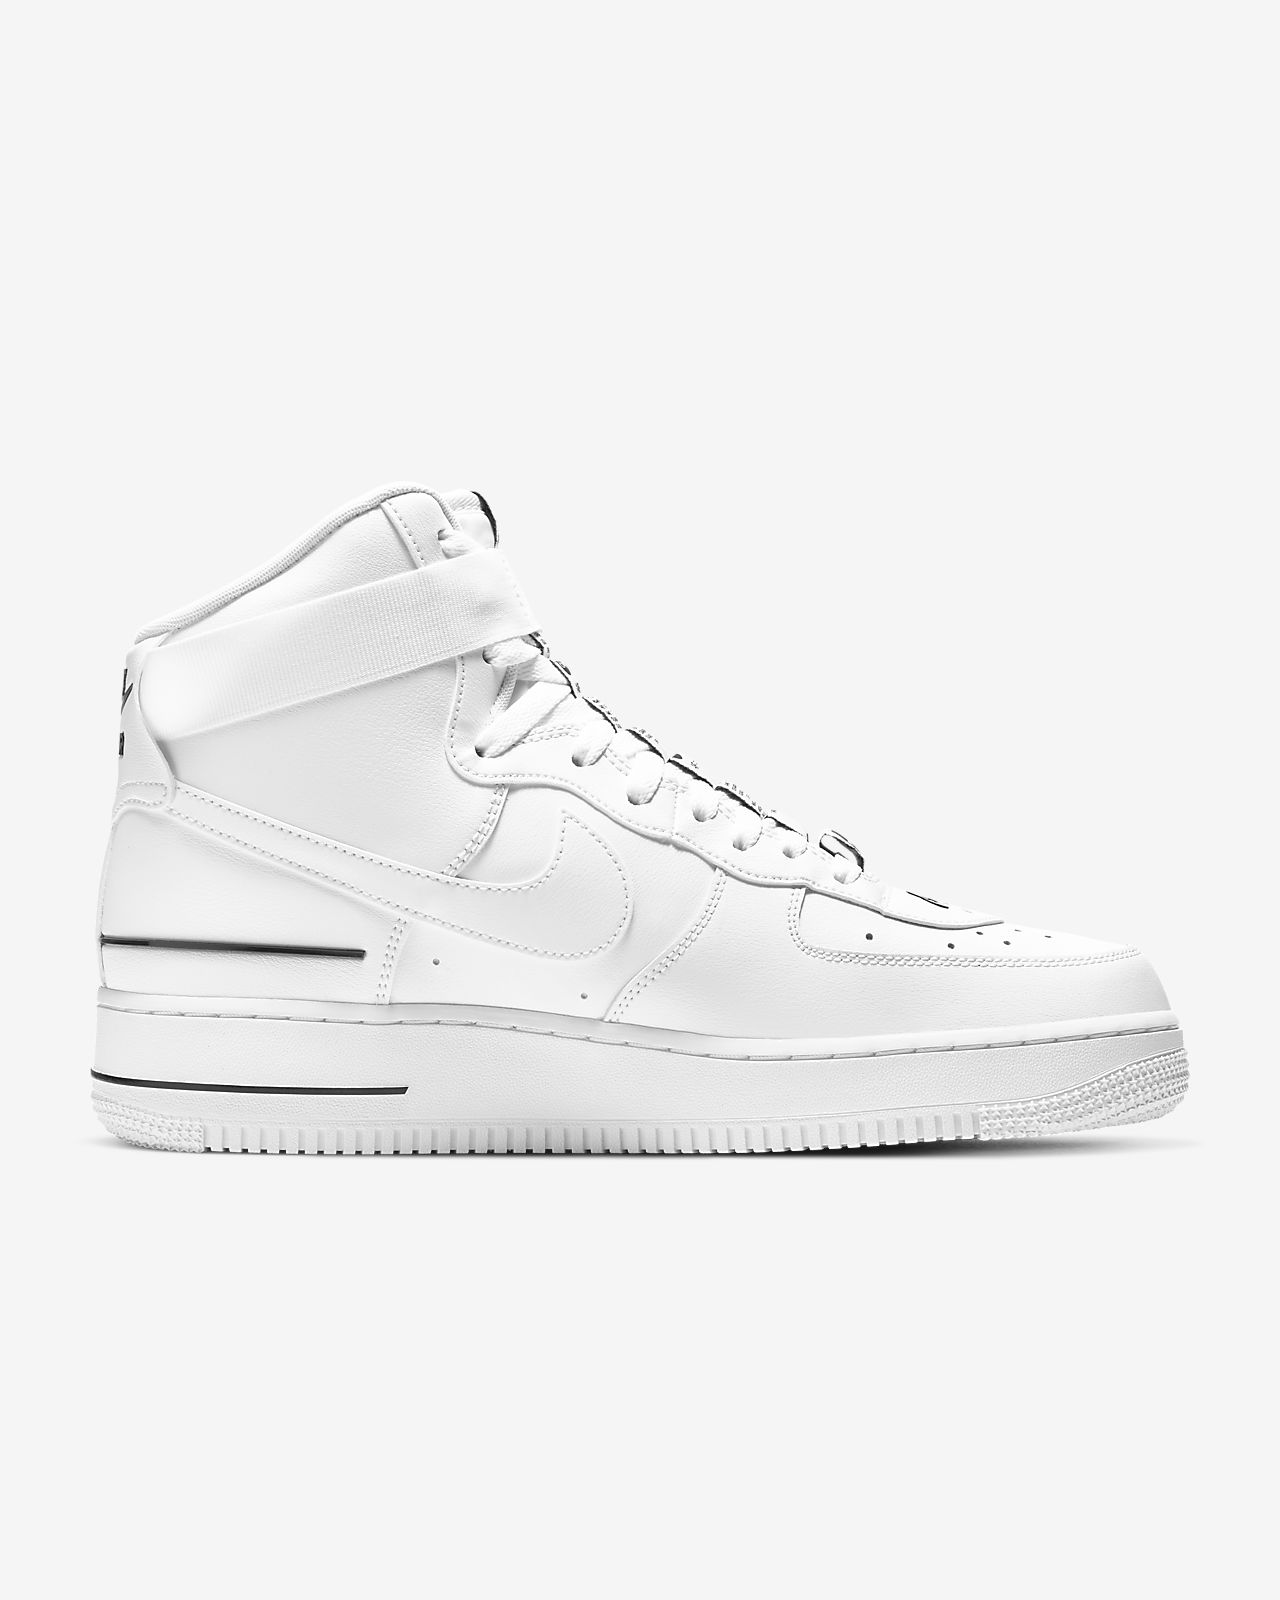 mens nike air force 1 size 7.5